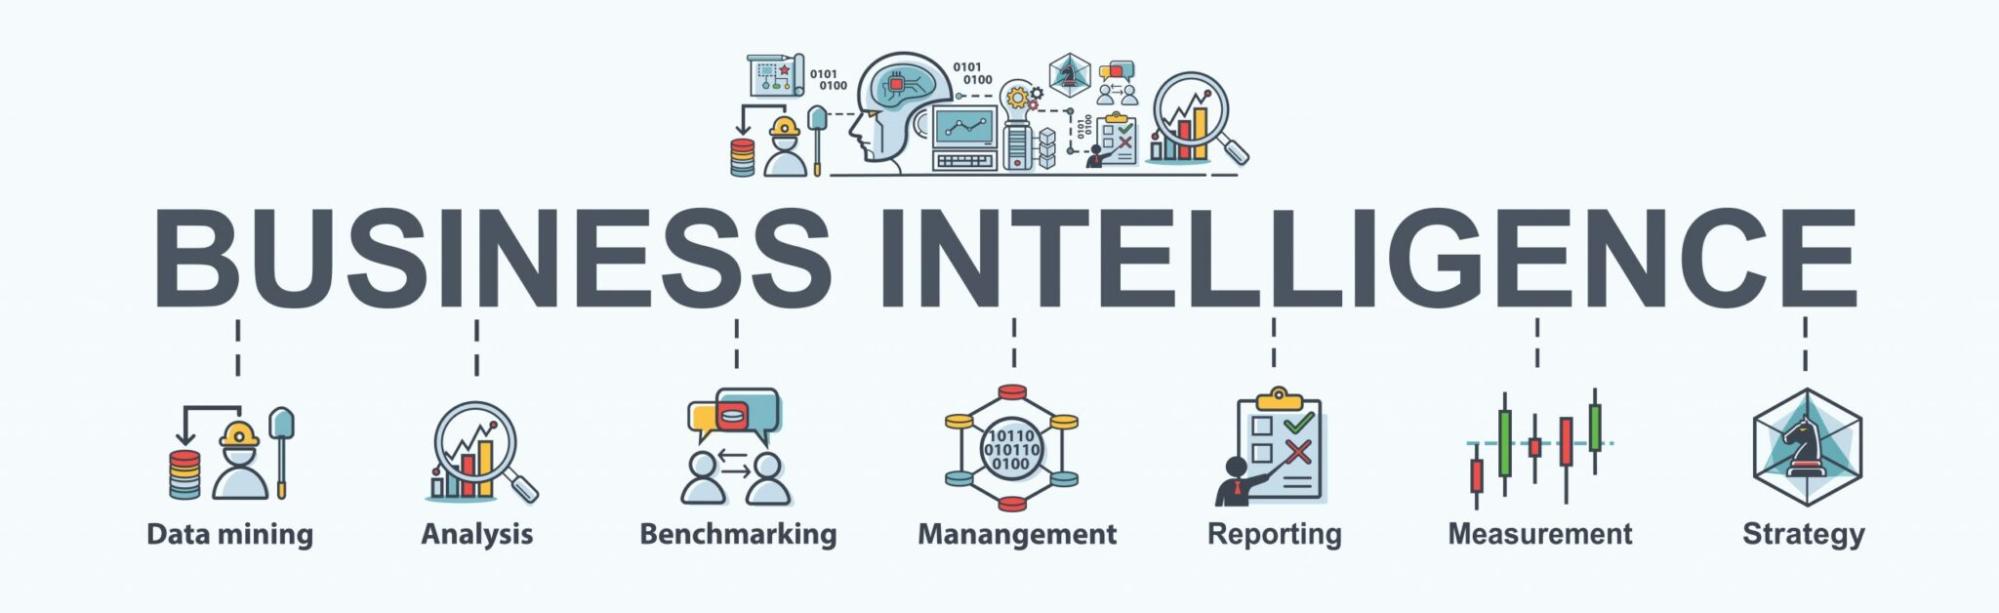 What are the skills sets required for a business intelligence developer?